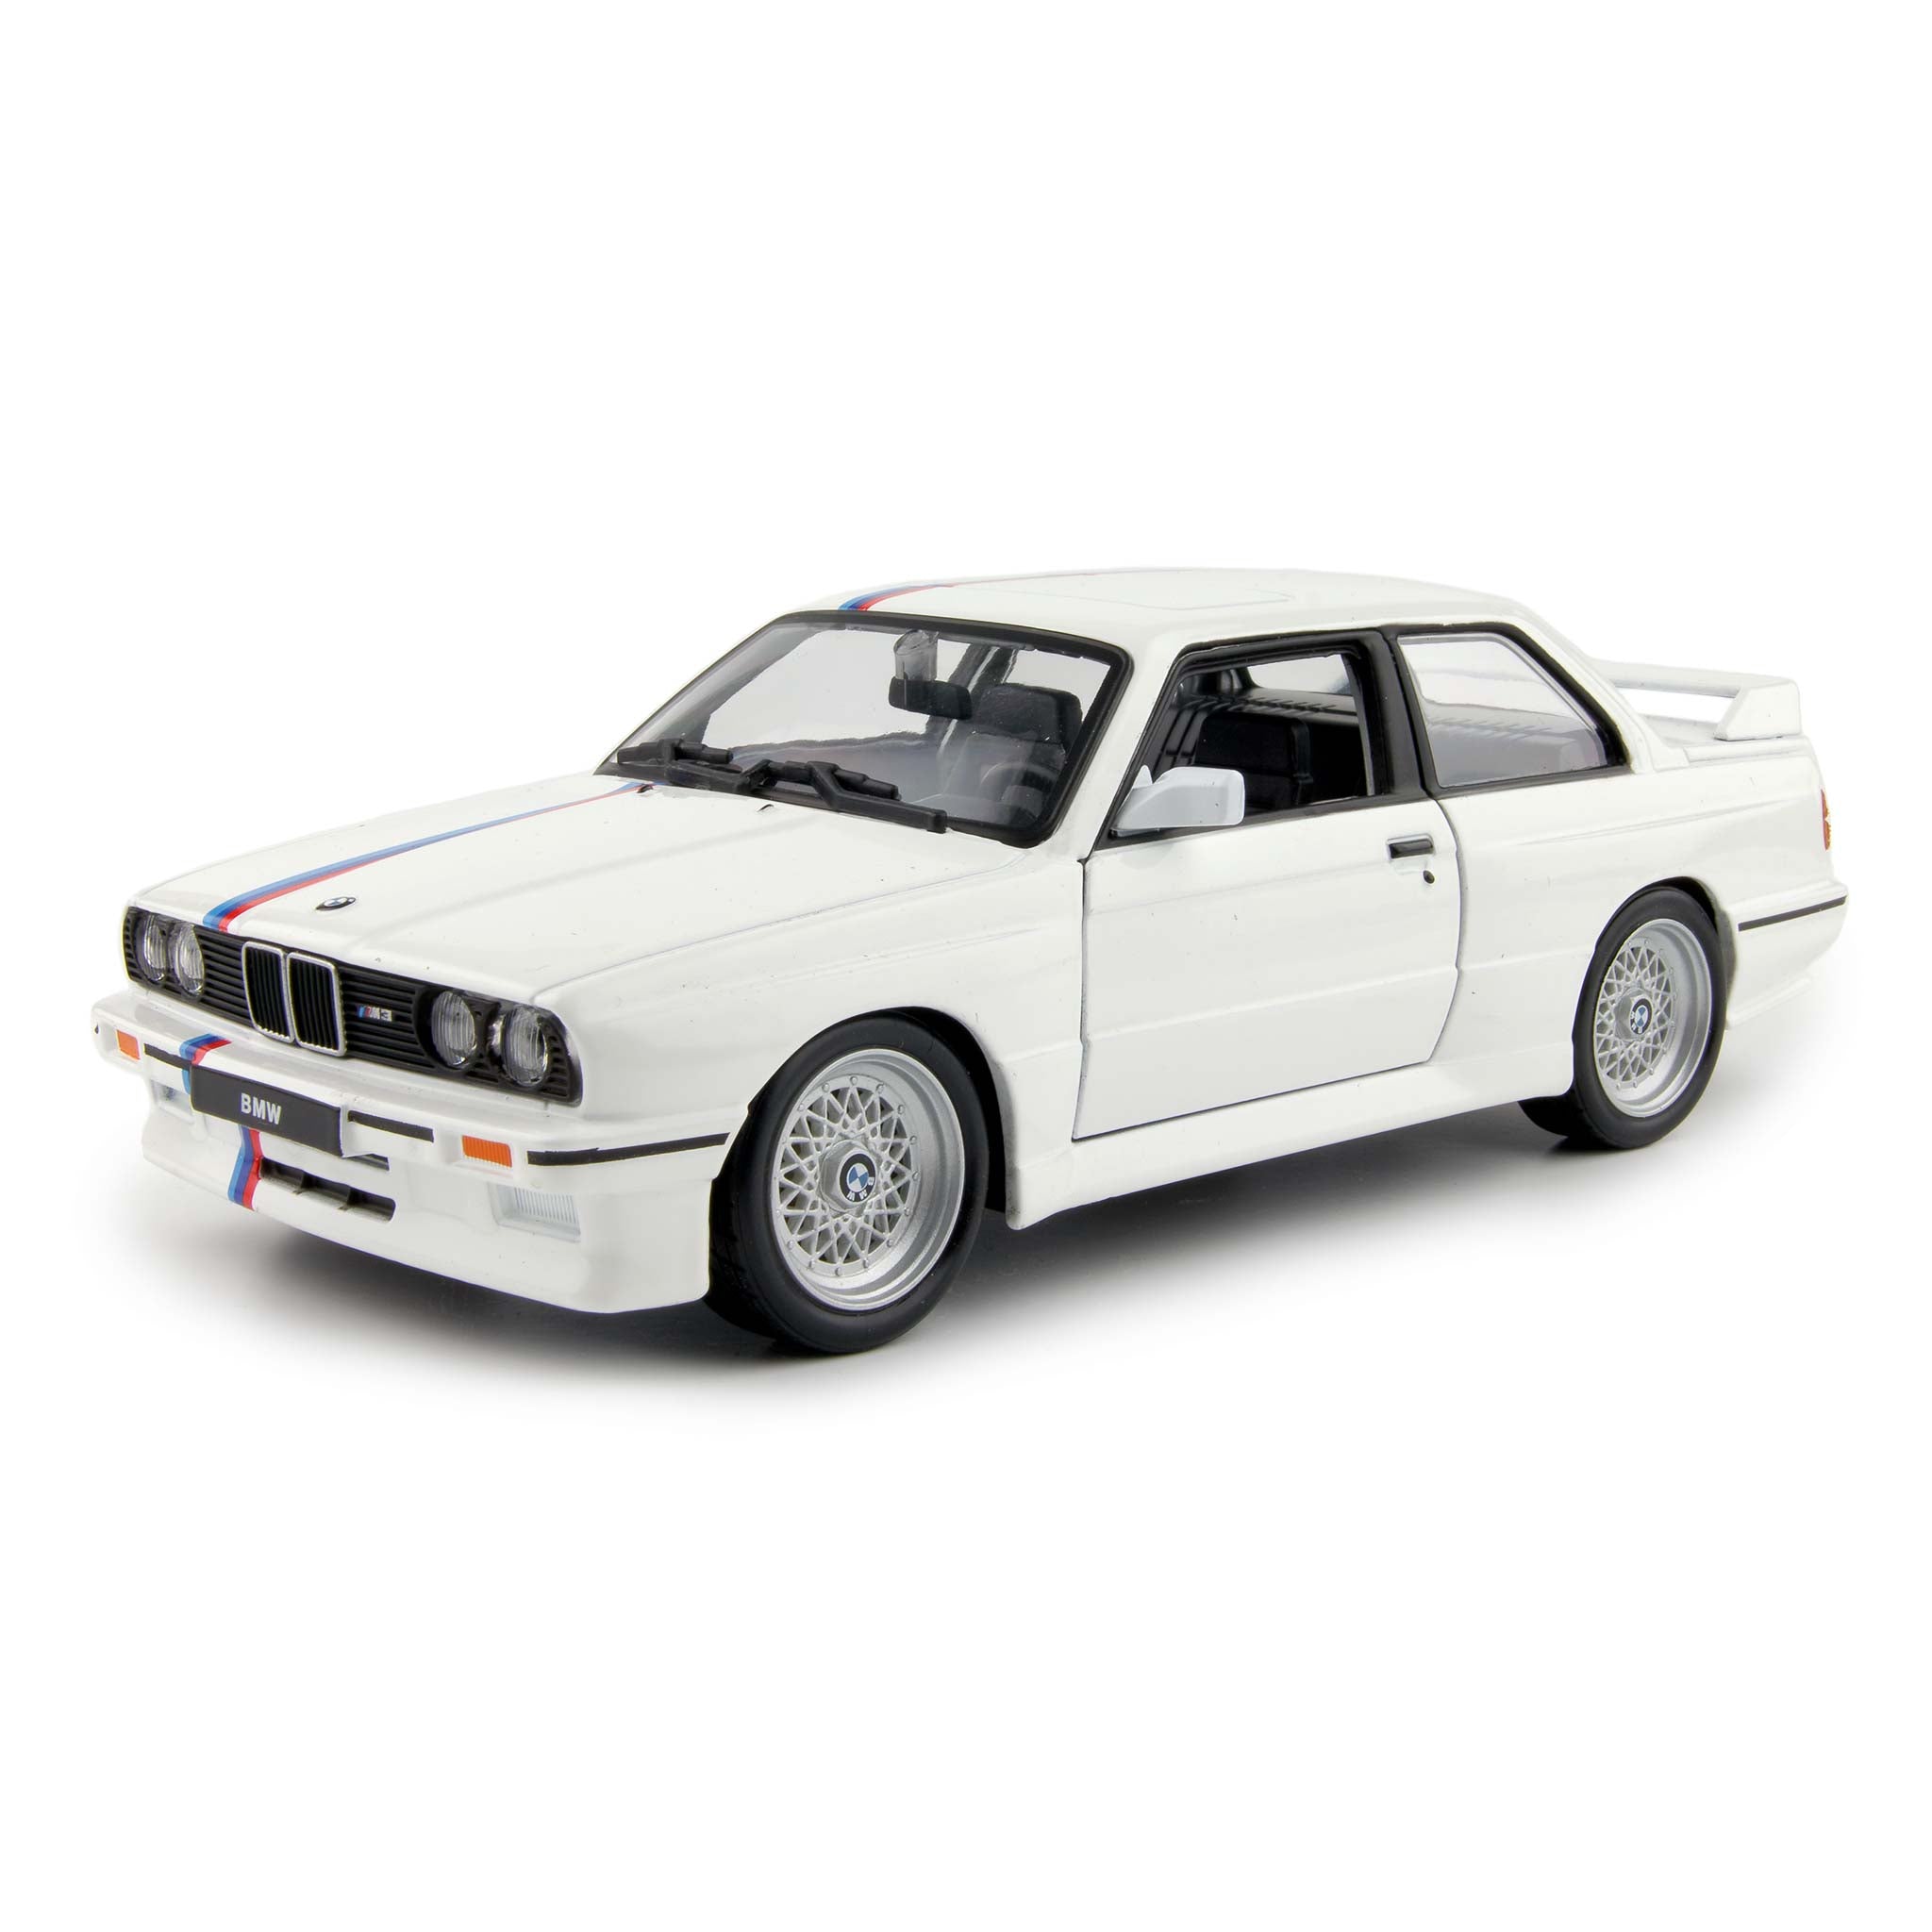 TRUESCALE MINIATURES 1/43 - BMW M3 M-Performance Touring (G81)